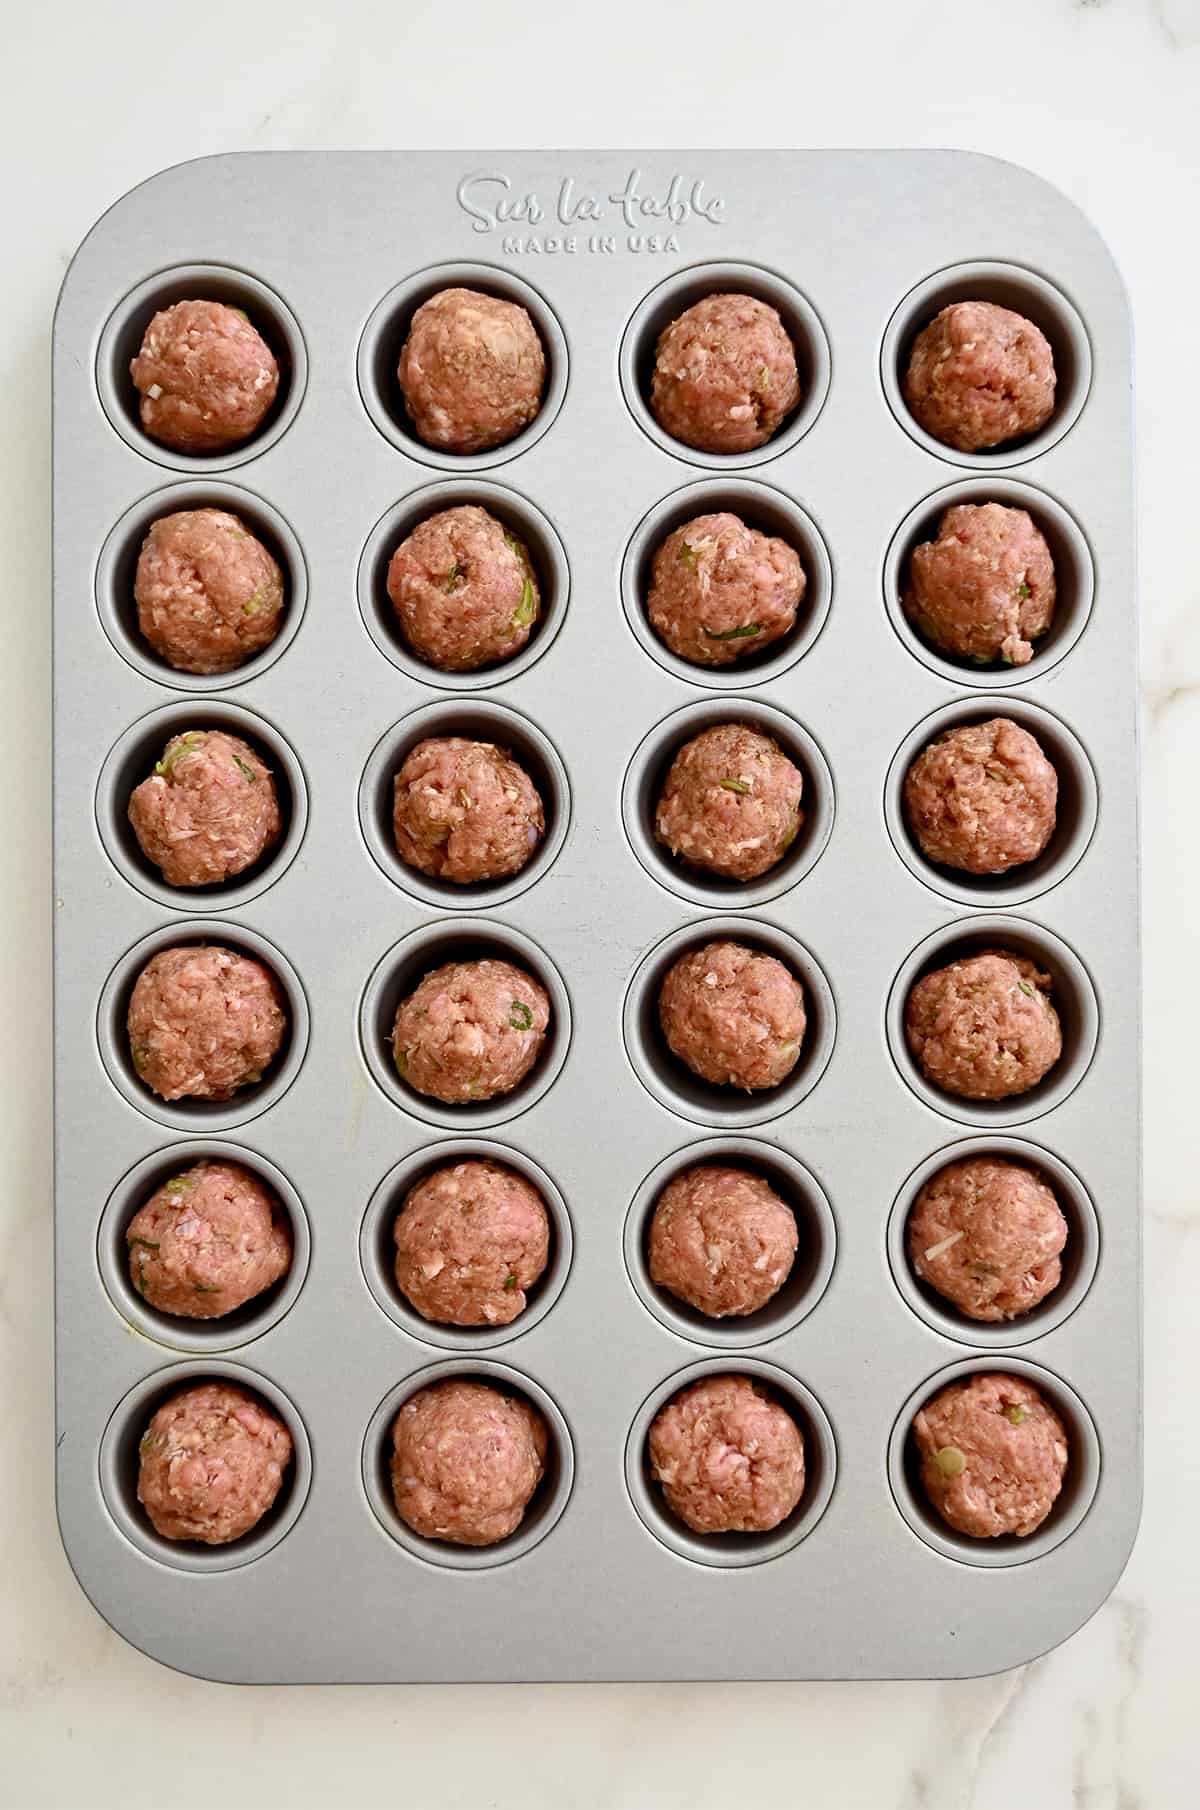 Unbaked meatballs in a mini muffin pan.